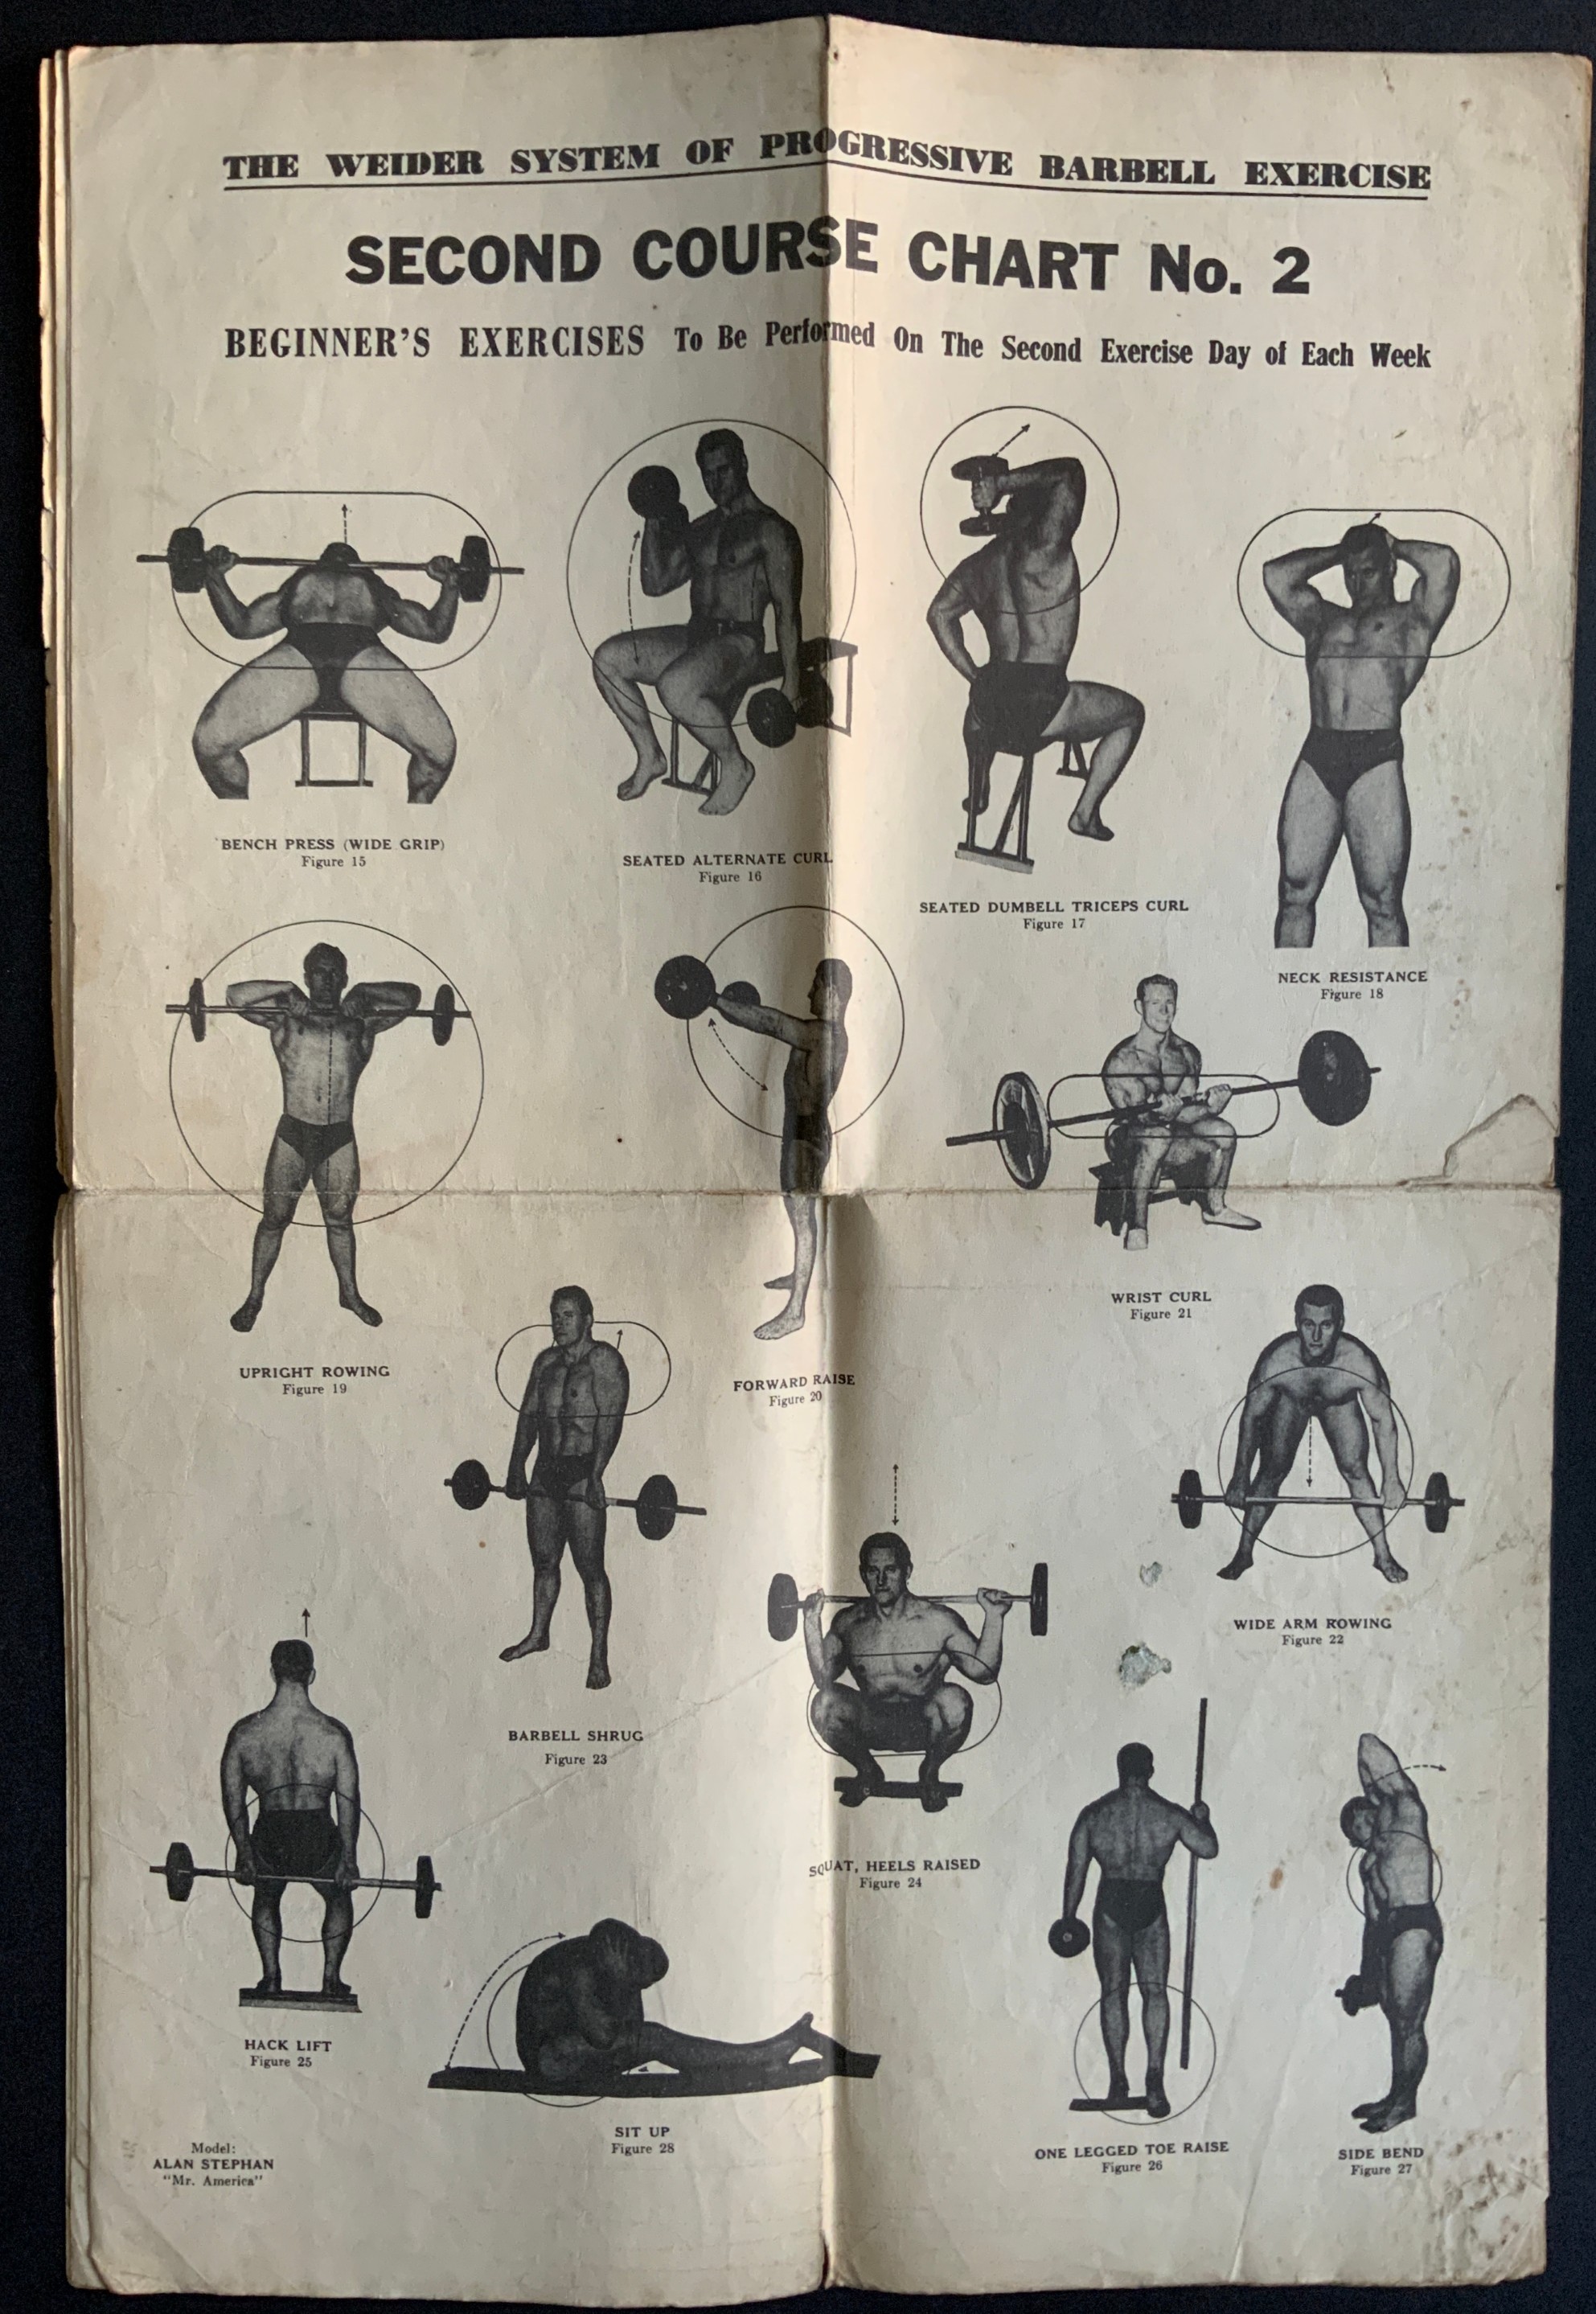 SIX THE WEIDER SYSTEM OF PROGRESSIVE BARBELL EXERCISE FIRST COURSE CHARTS - Image 2 of 6